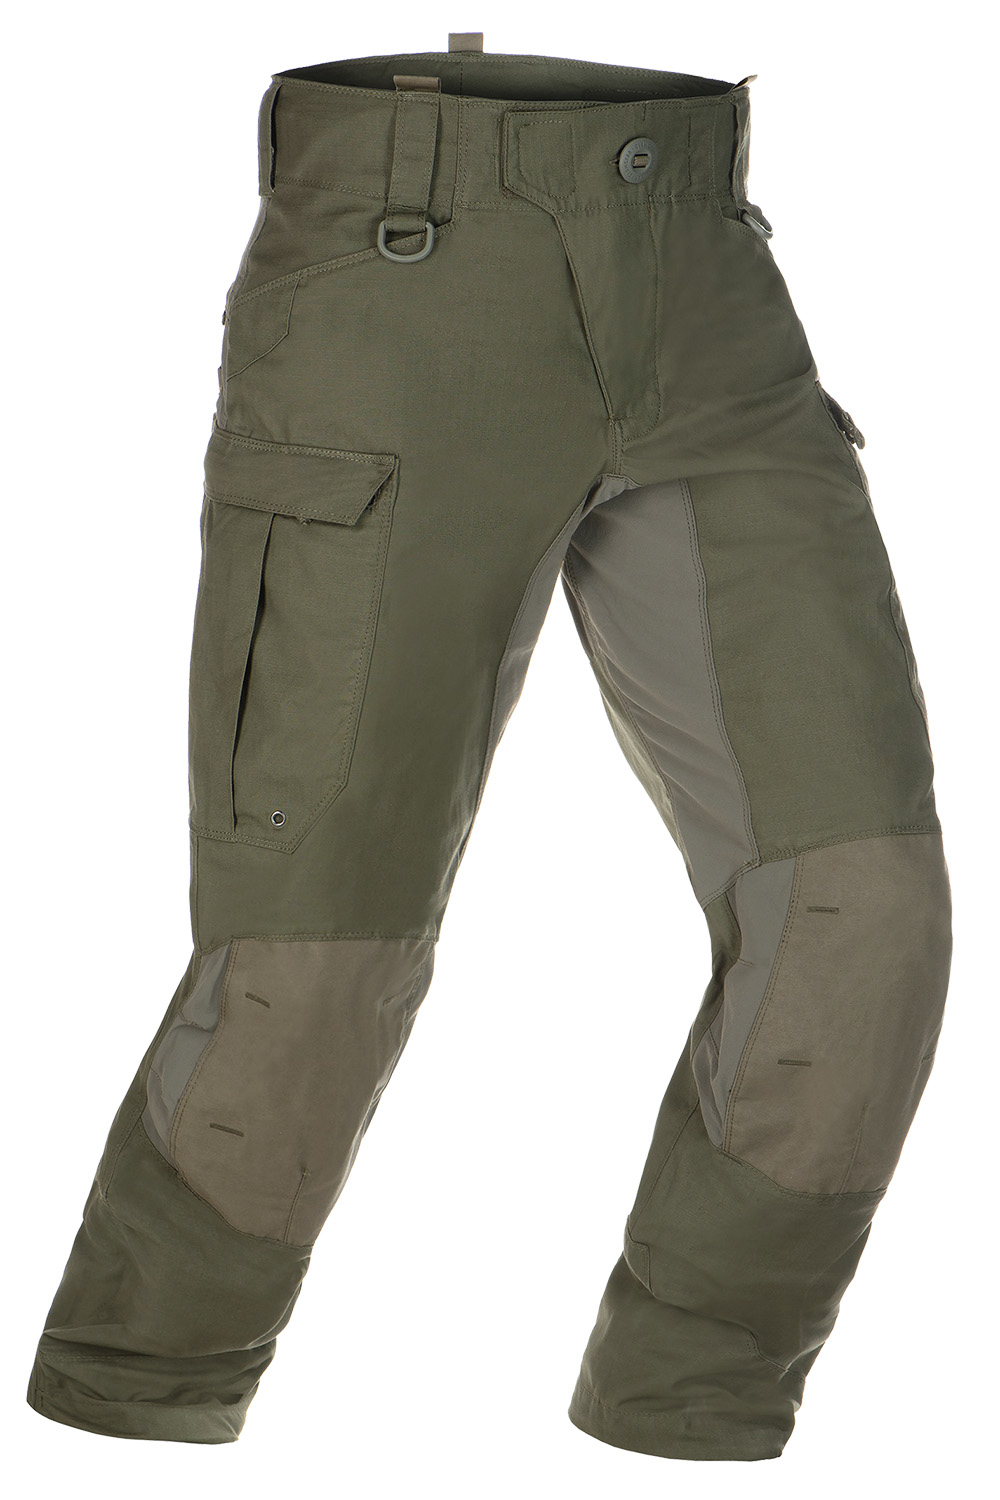 Clawgear Operator Combat Pant 38/34 Navy 